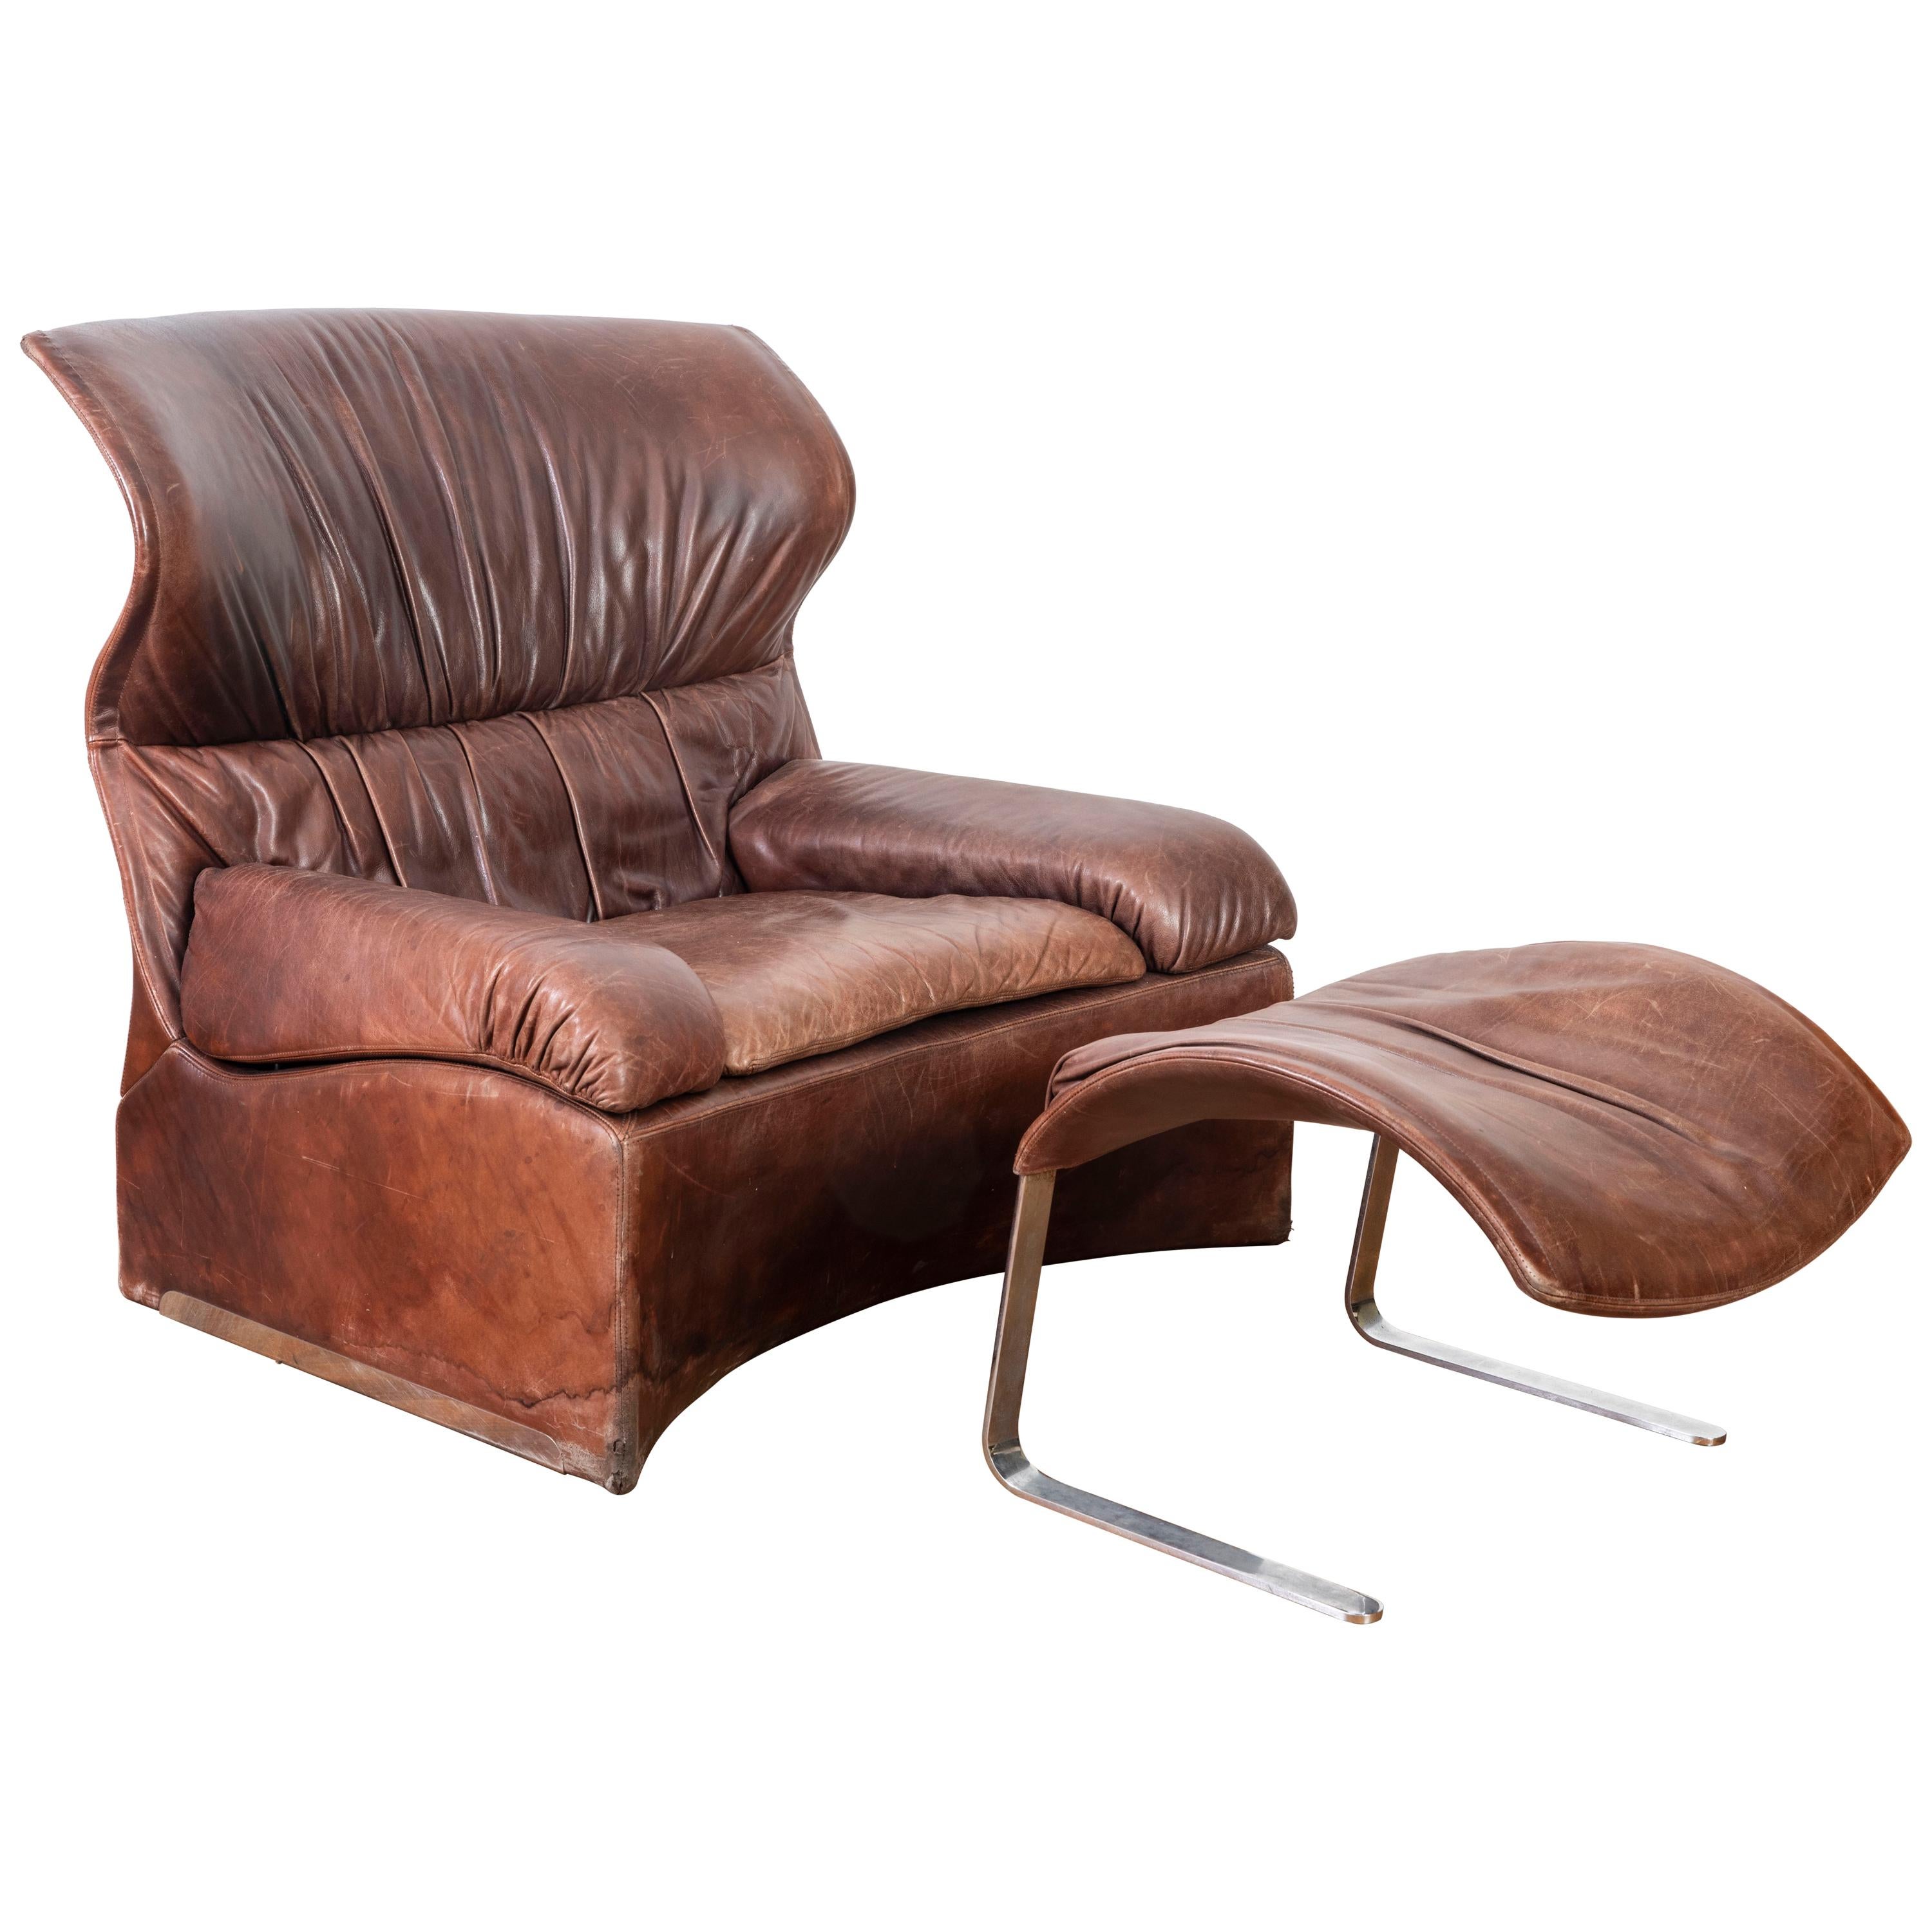 Giovanni Offredi Italian Cognac Leather Lounge Chair with Footstool for Saporiti For Sale